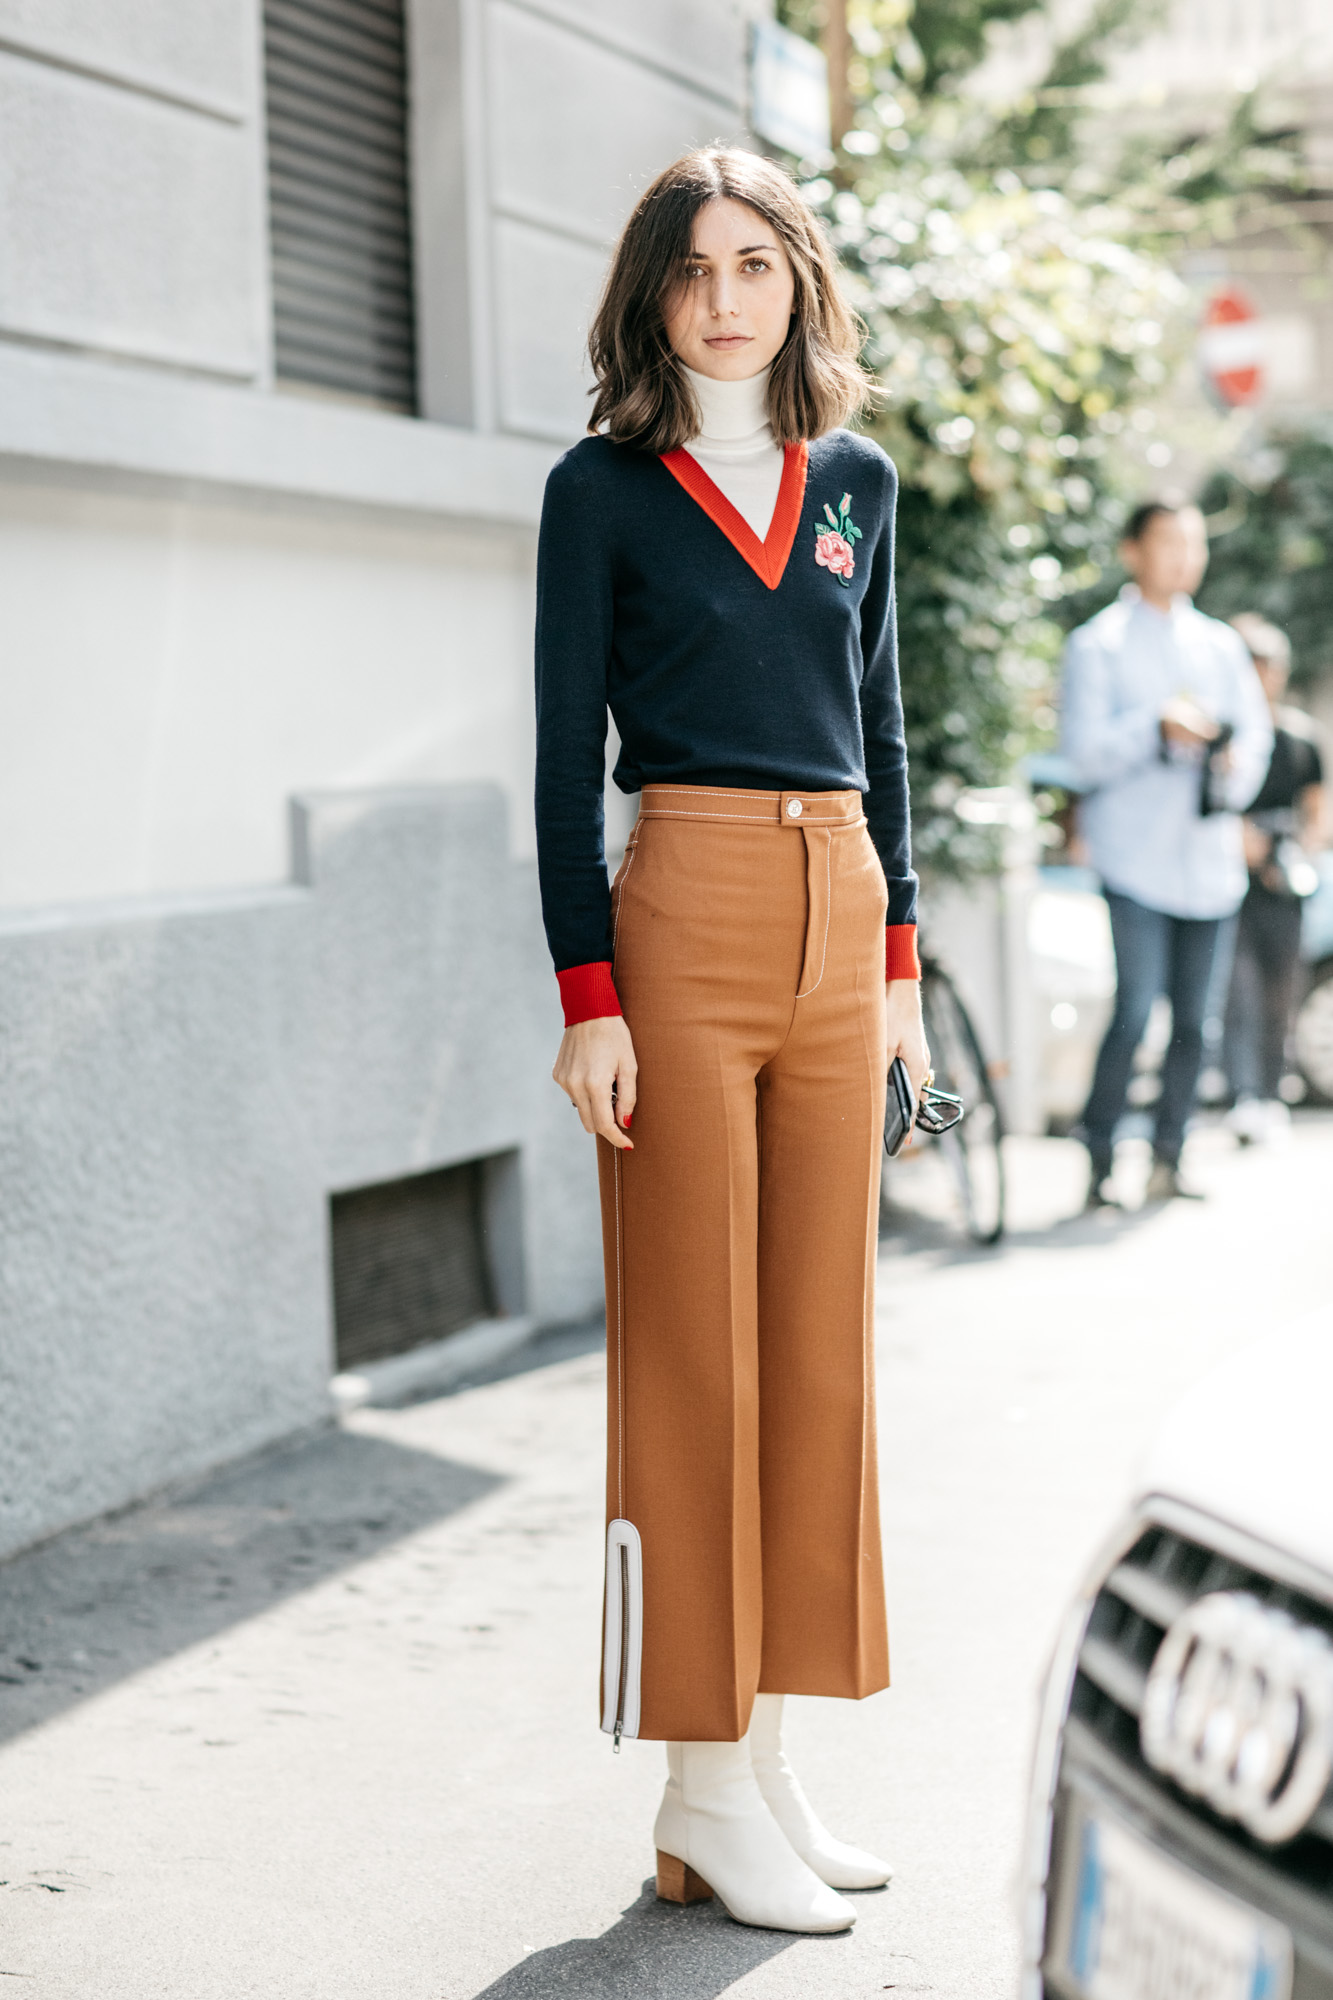 milanfw_ss2017_day3-20160923-7883